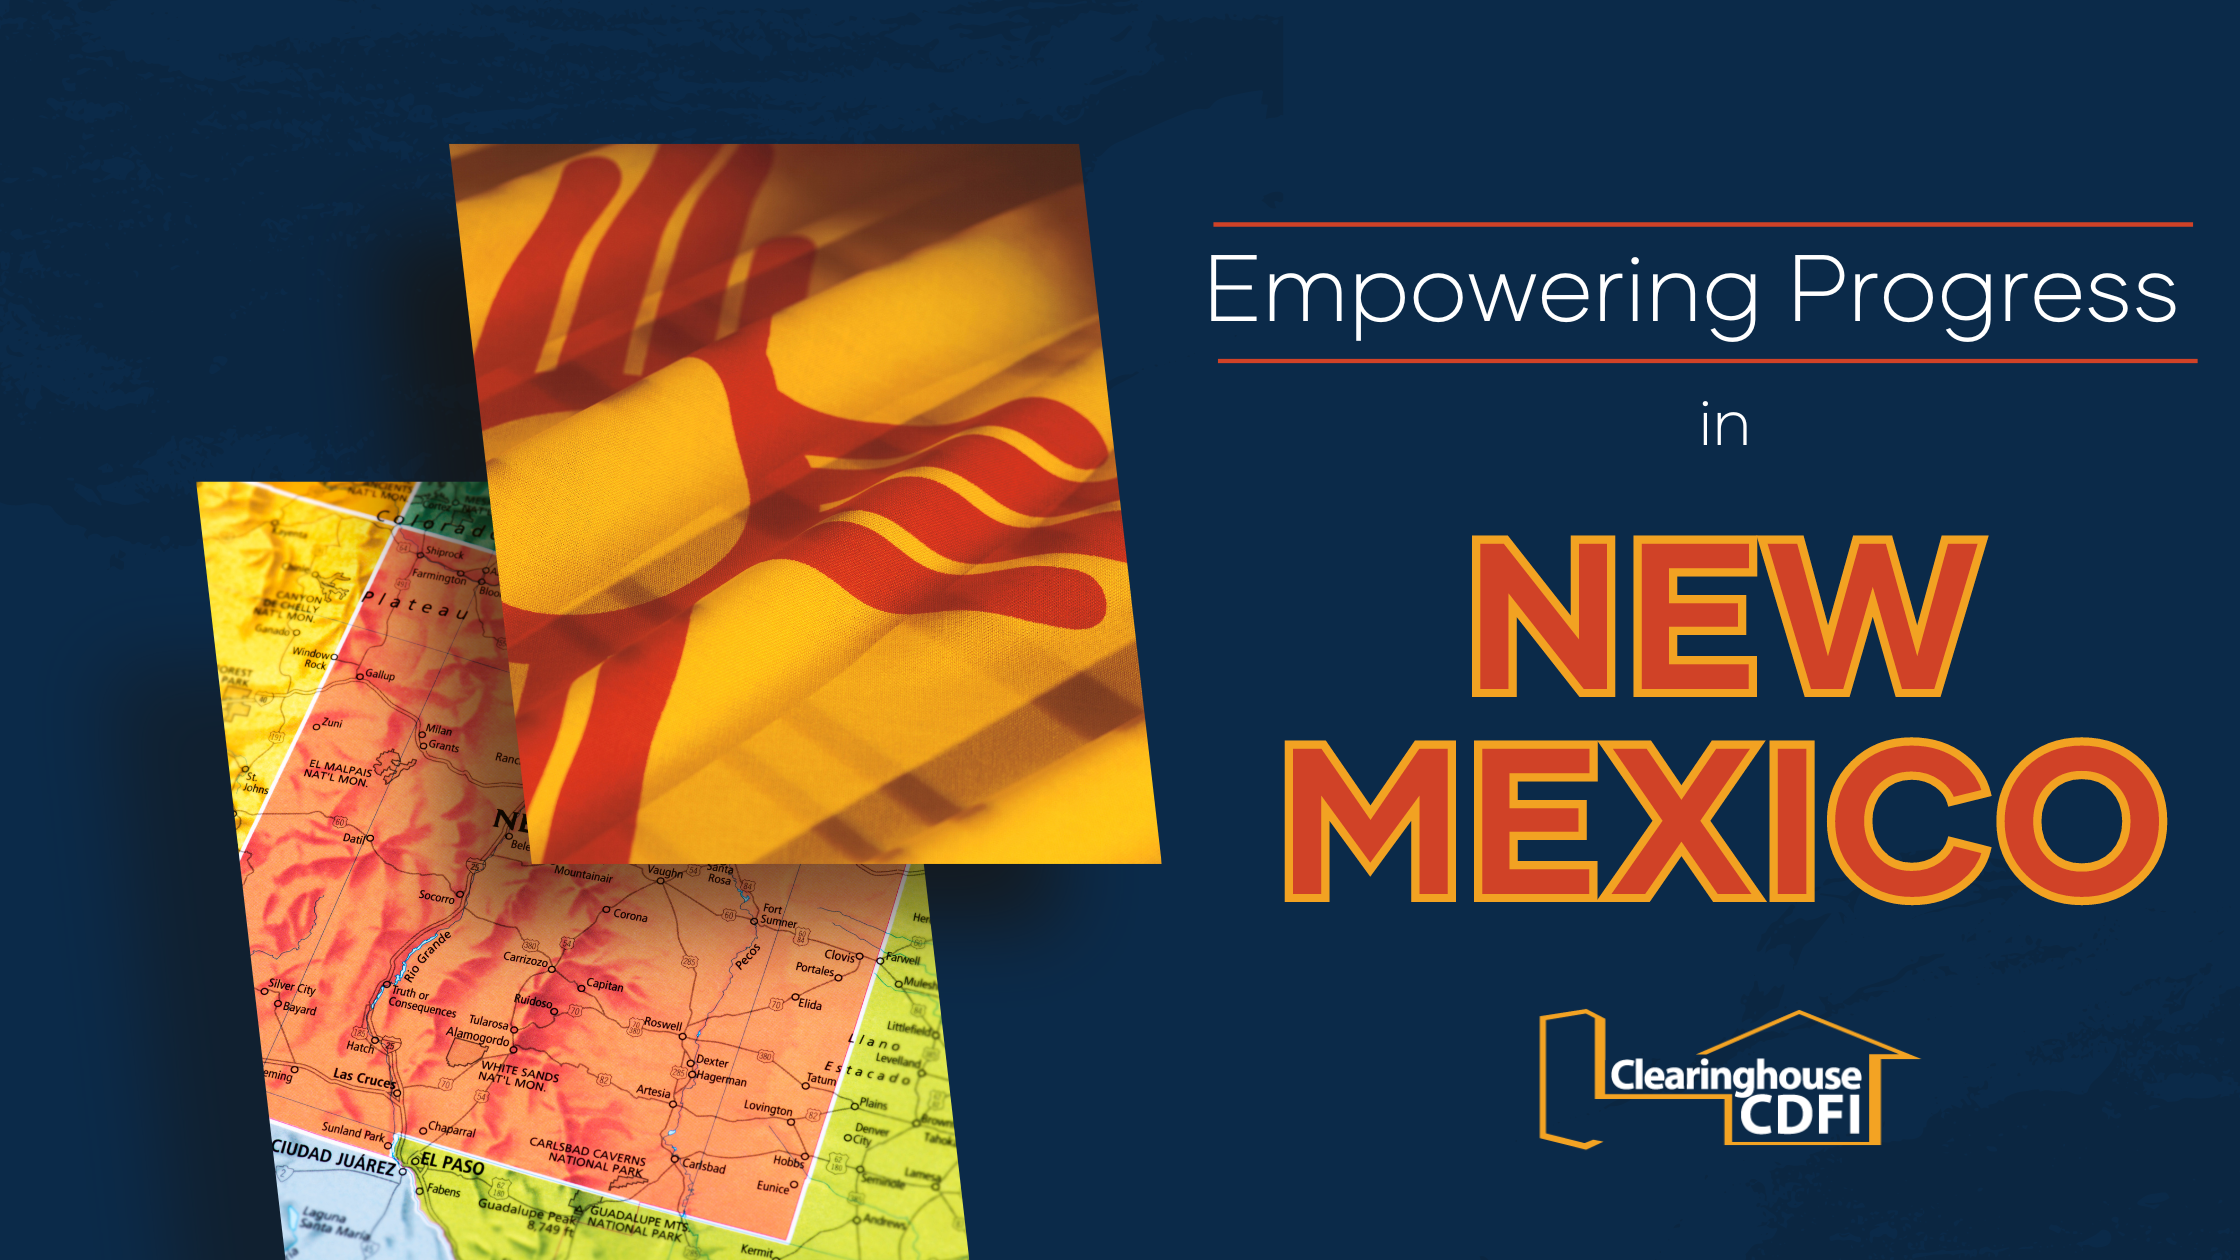 Dark blue image with a photo showing New Mexico on a map and a small clipping of the New Mexico flag. The words "Empowering Progress in New Mexico" in yellow, white, and orange/red with the Clearinghouse CDFI logo beneath